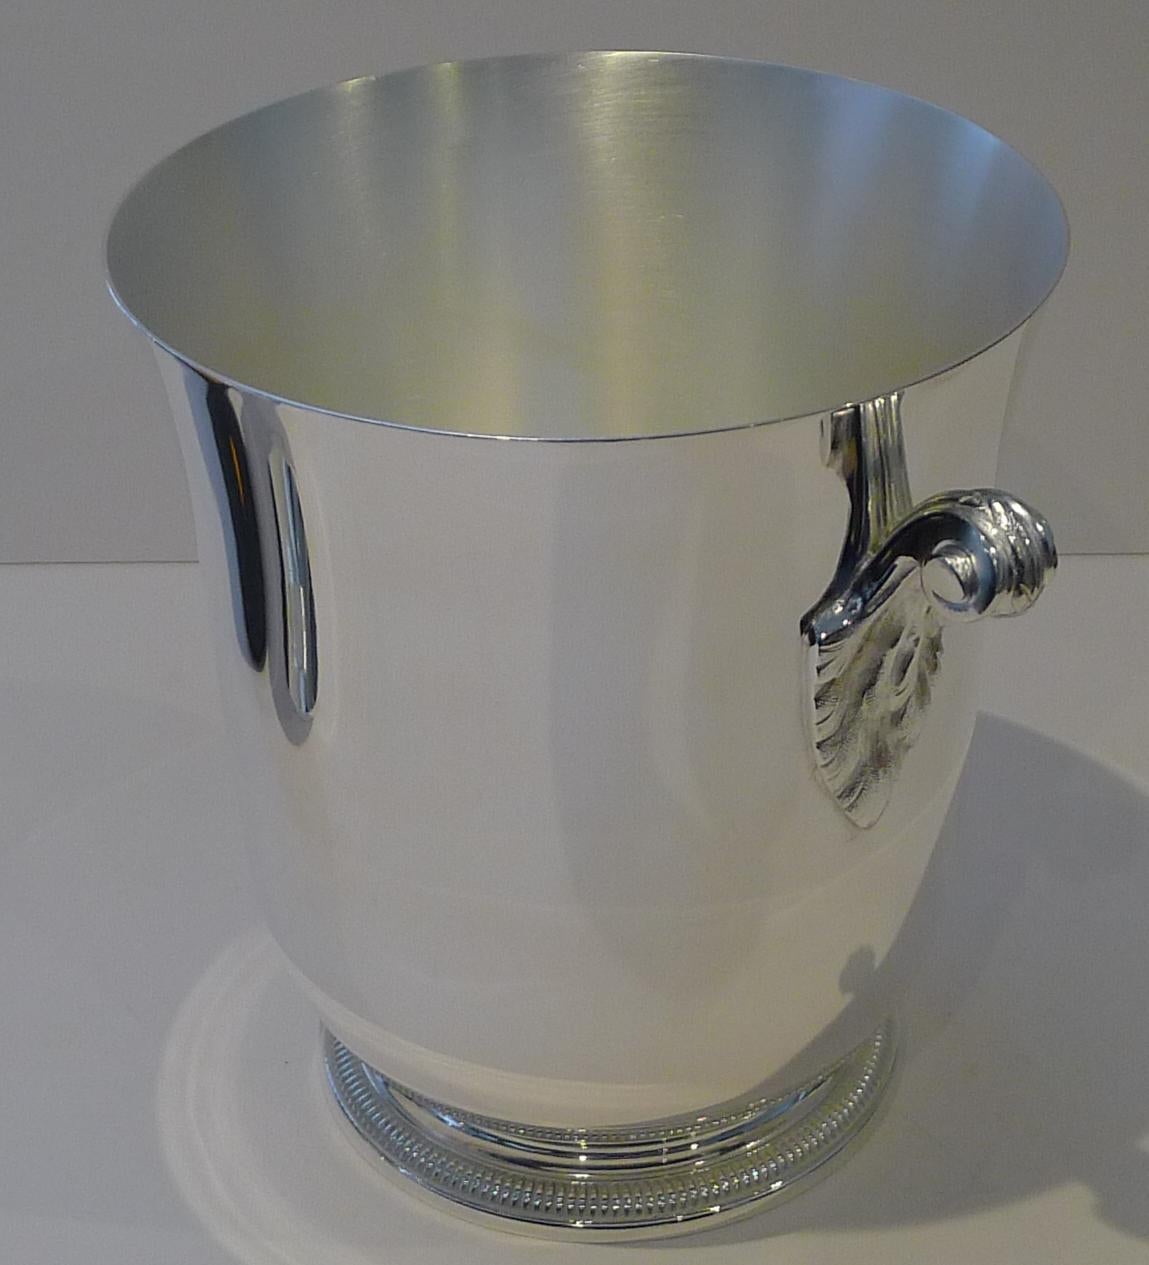 Mid-20th Century Fine French Champagne Bucket / Wine Cooler by Ercuis, Paris c.1960 For Sale